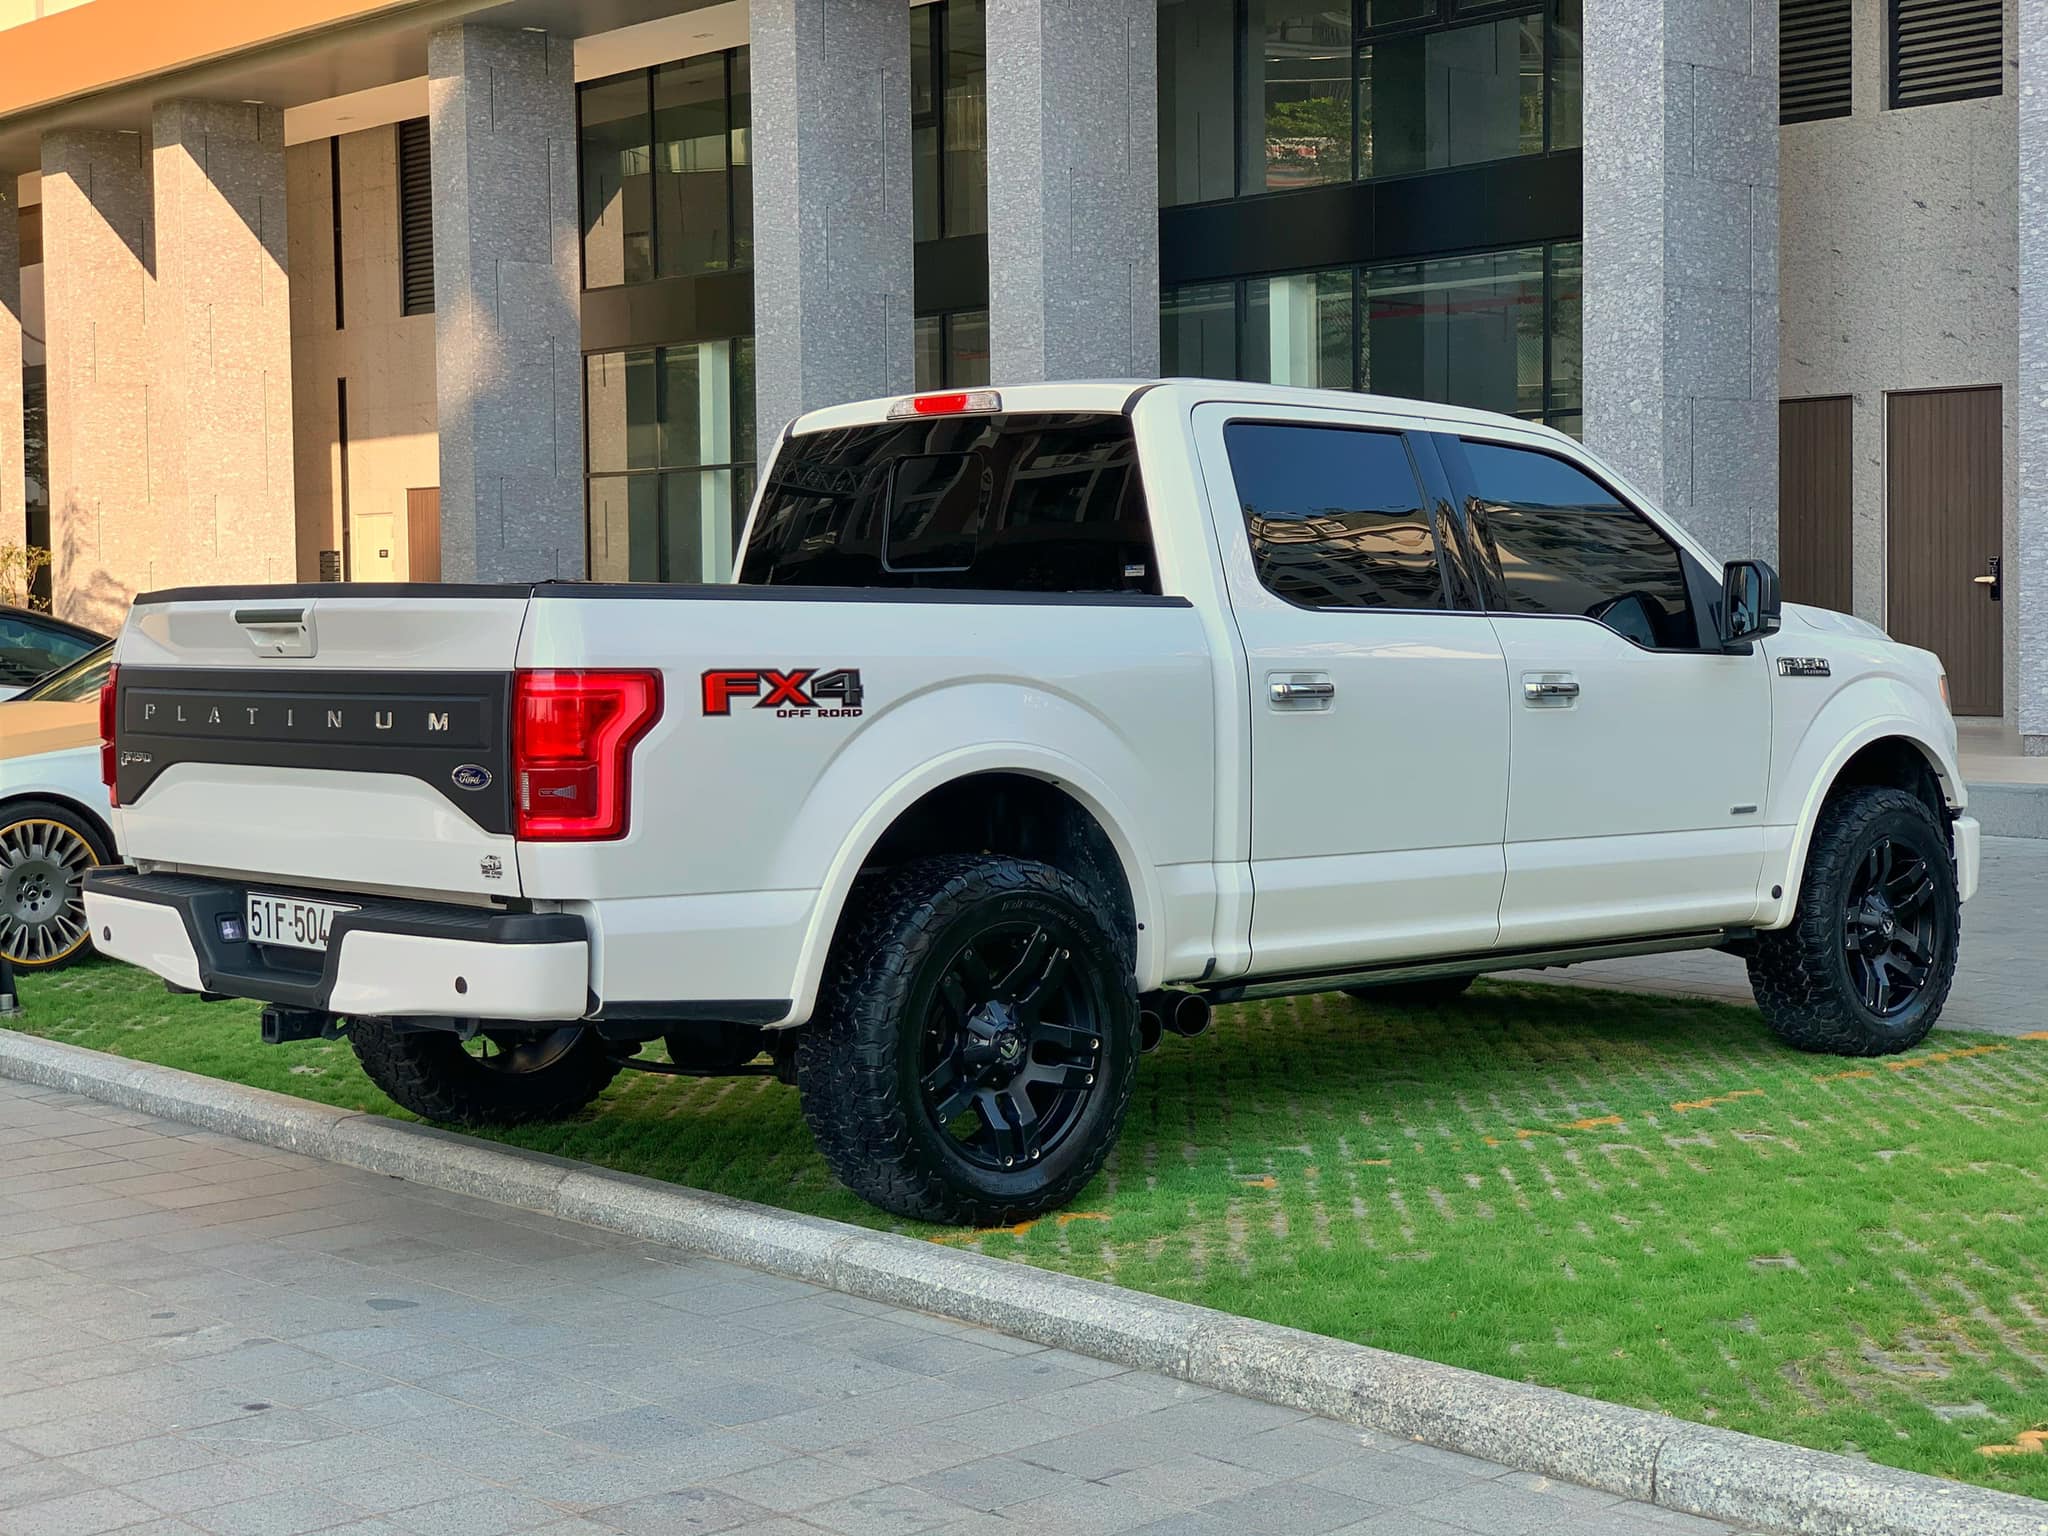 LUXURY 2021 Ford F150 Platinum EcoBoost Review  YouTube